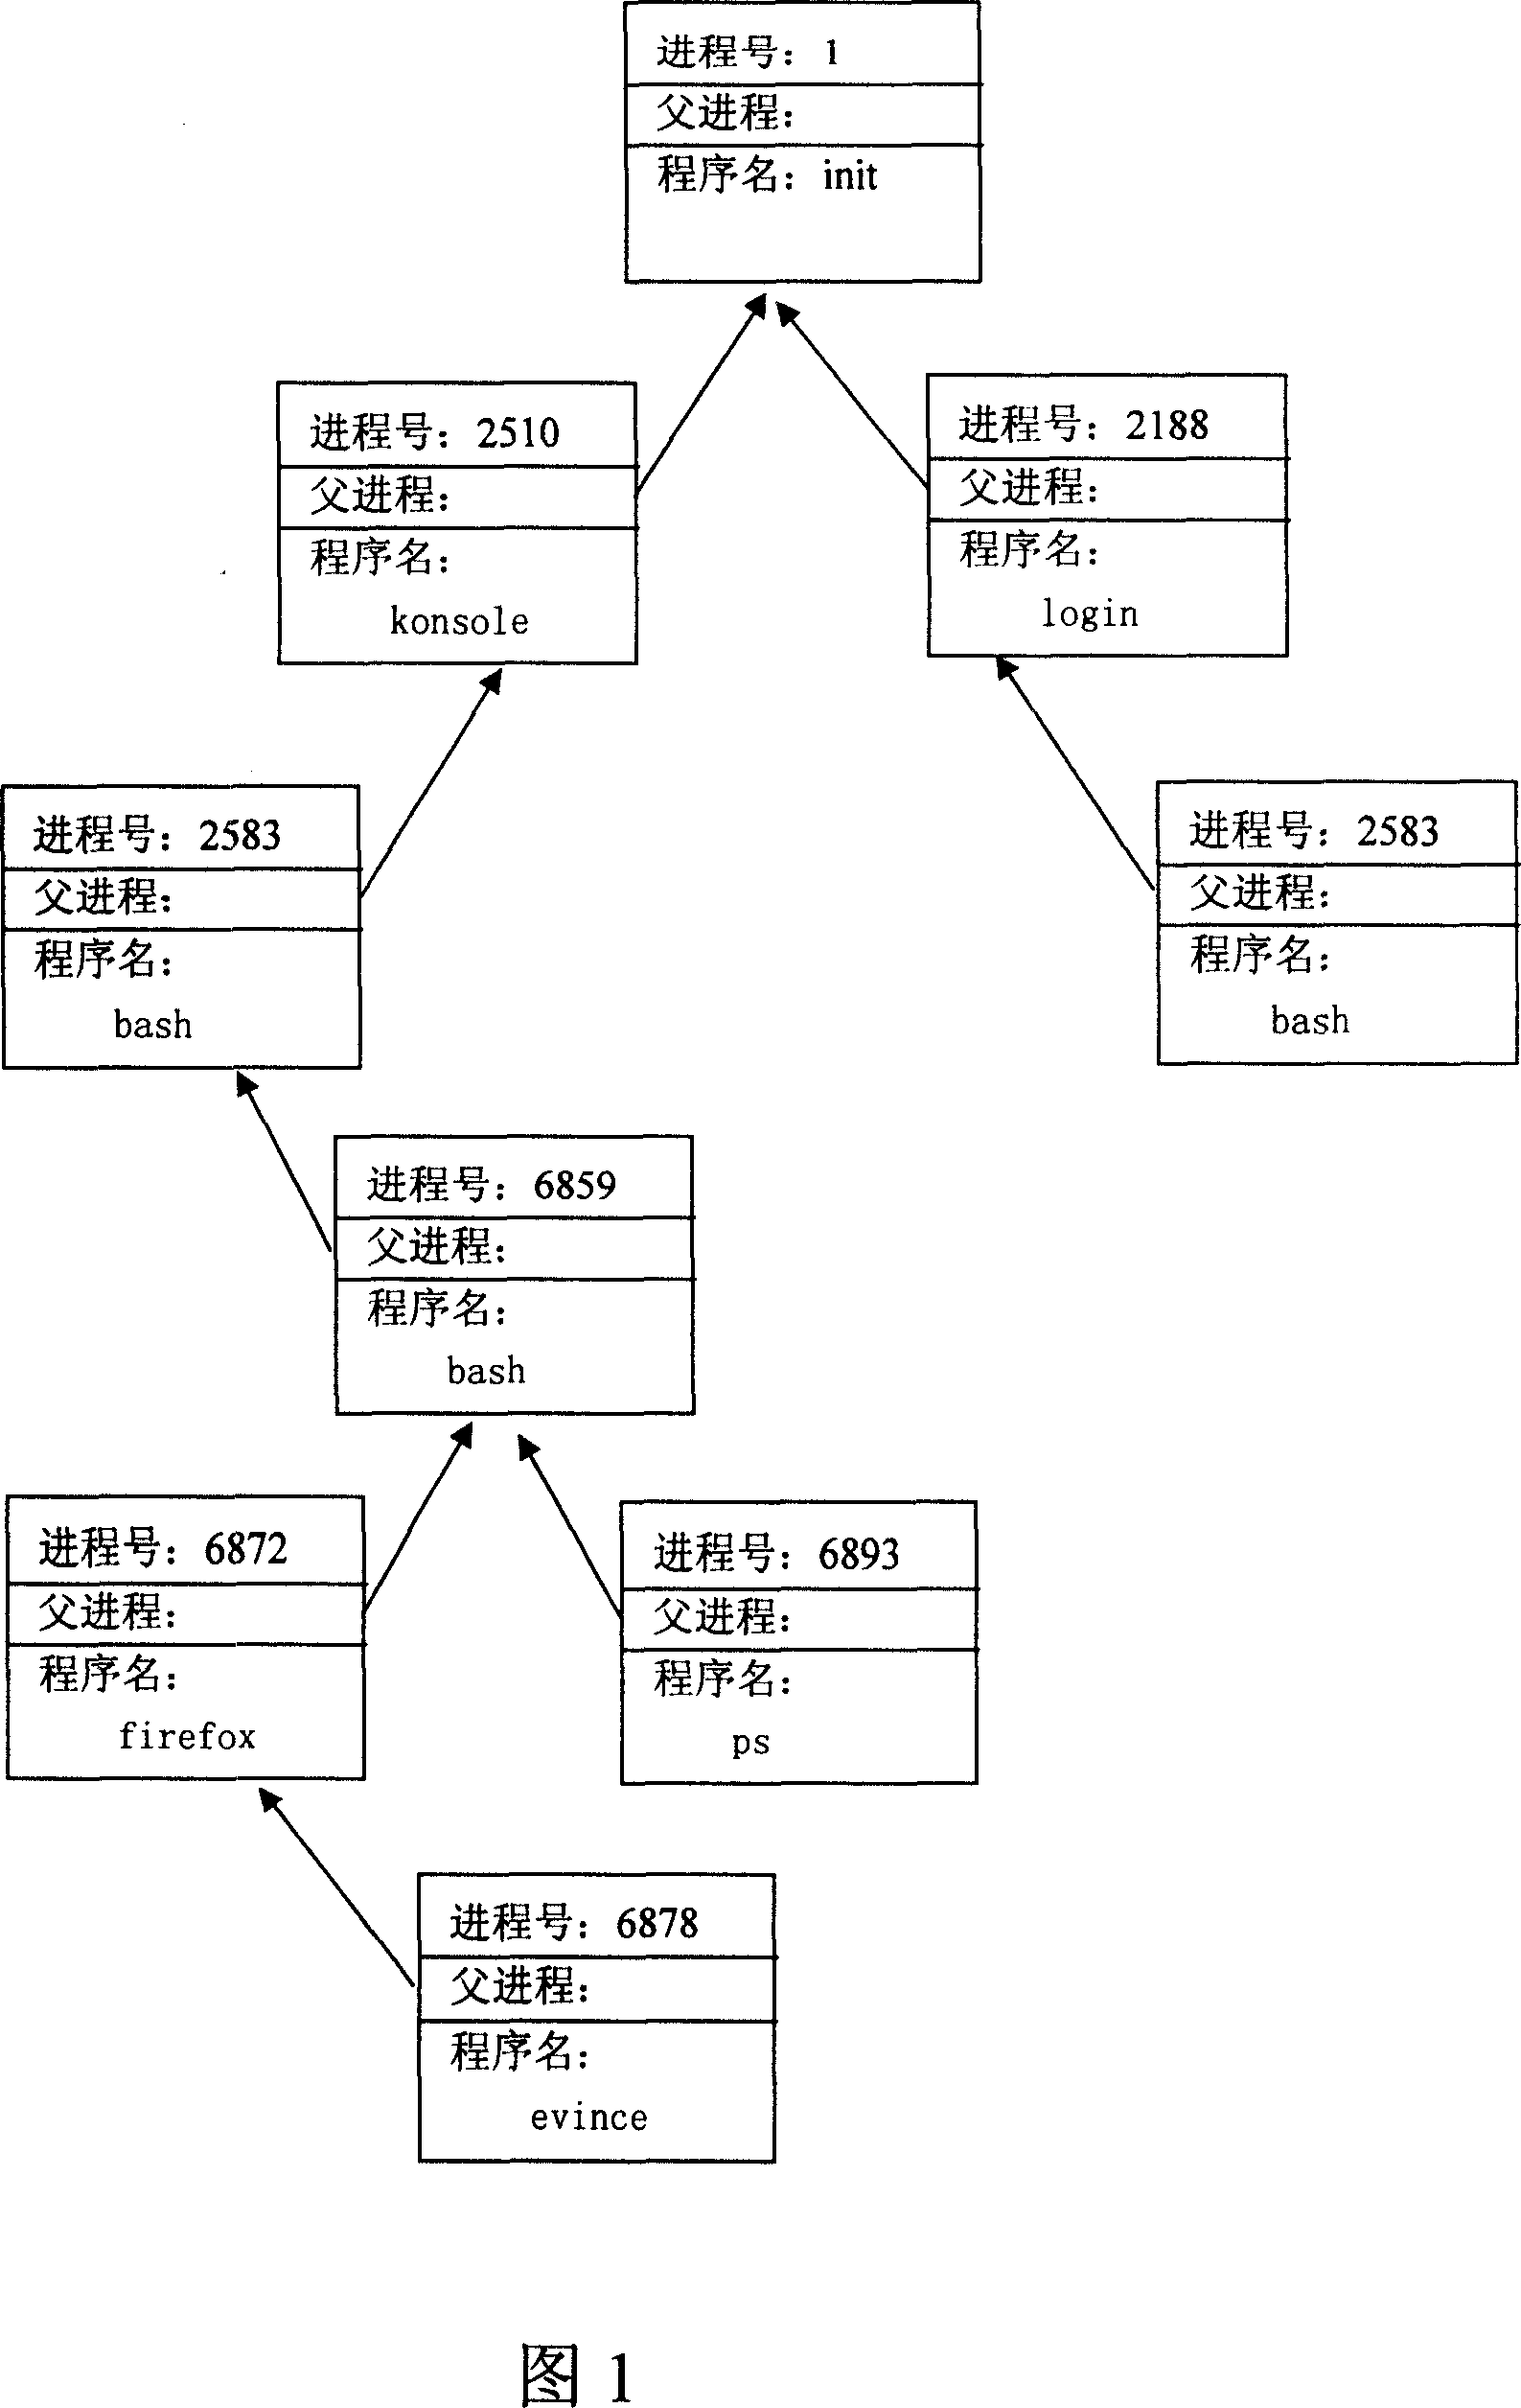 Method for controlling file access in operation system according to user's action history